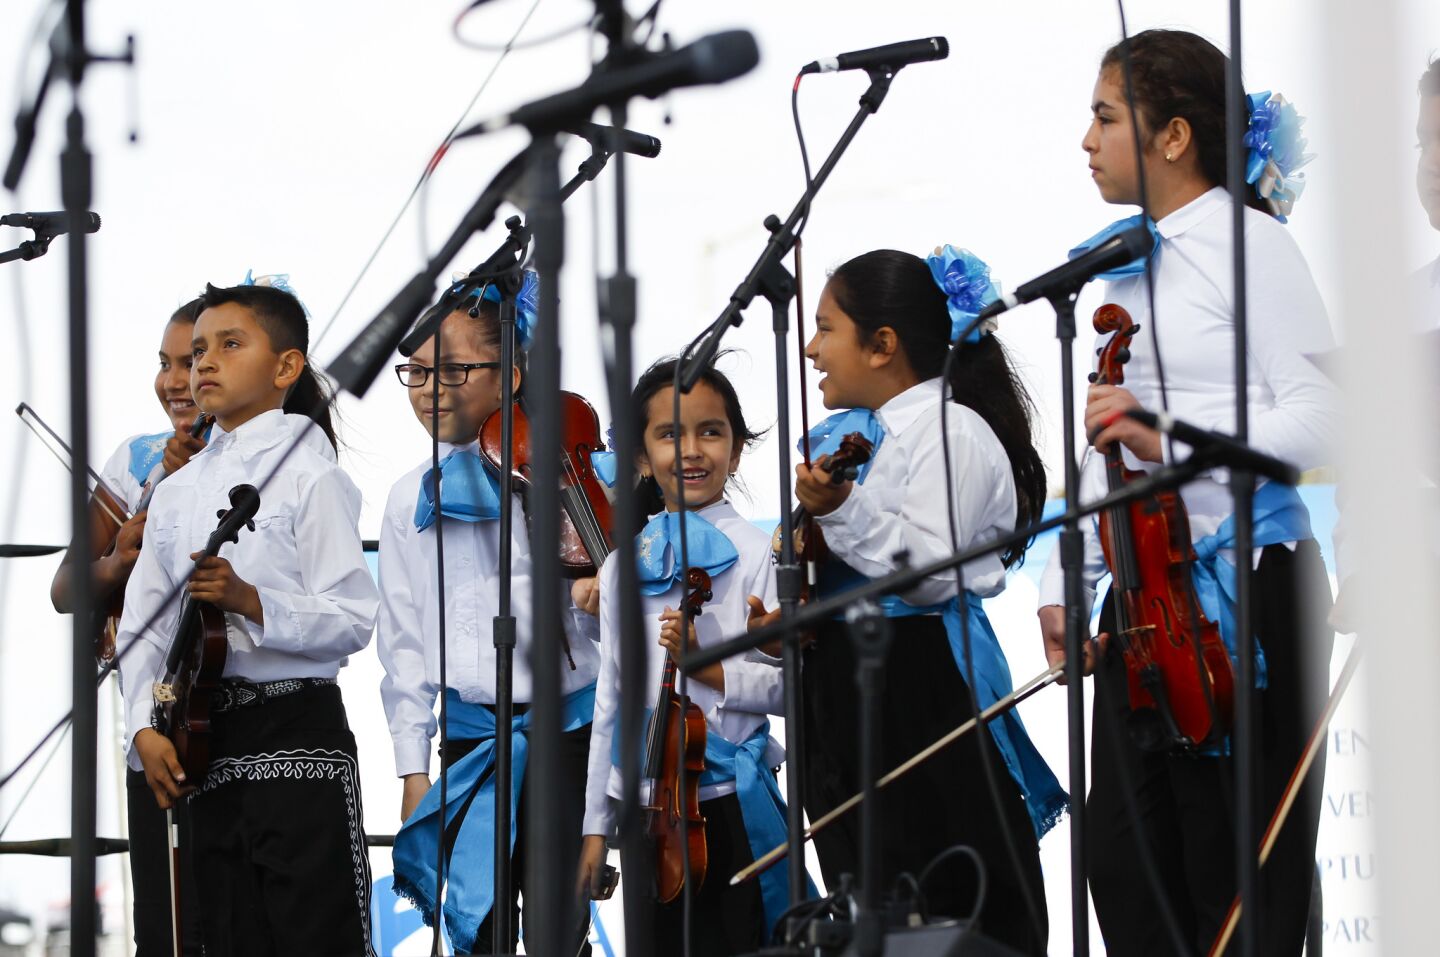 Students from the National City School District, grades 1 through 8, walk on stage to perform for the crowd at the annual International Mariachi Festival in National City.